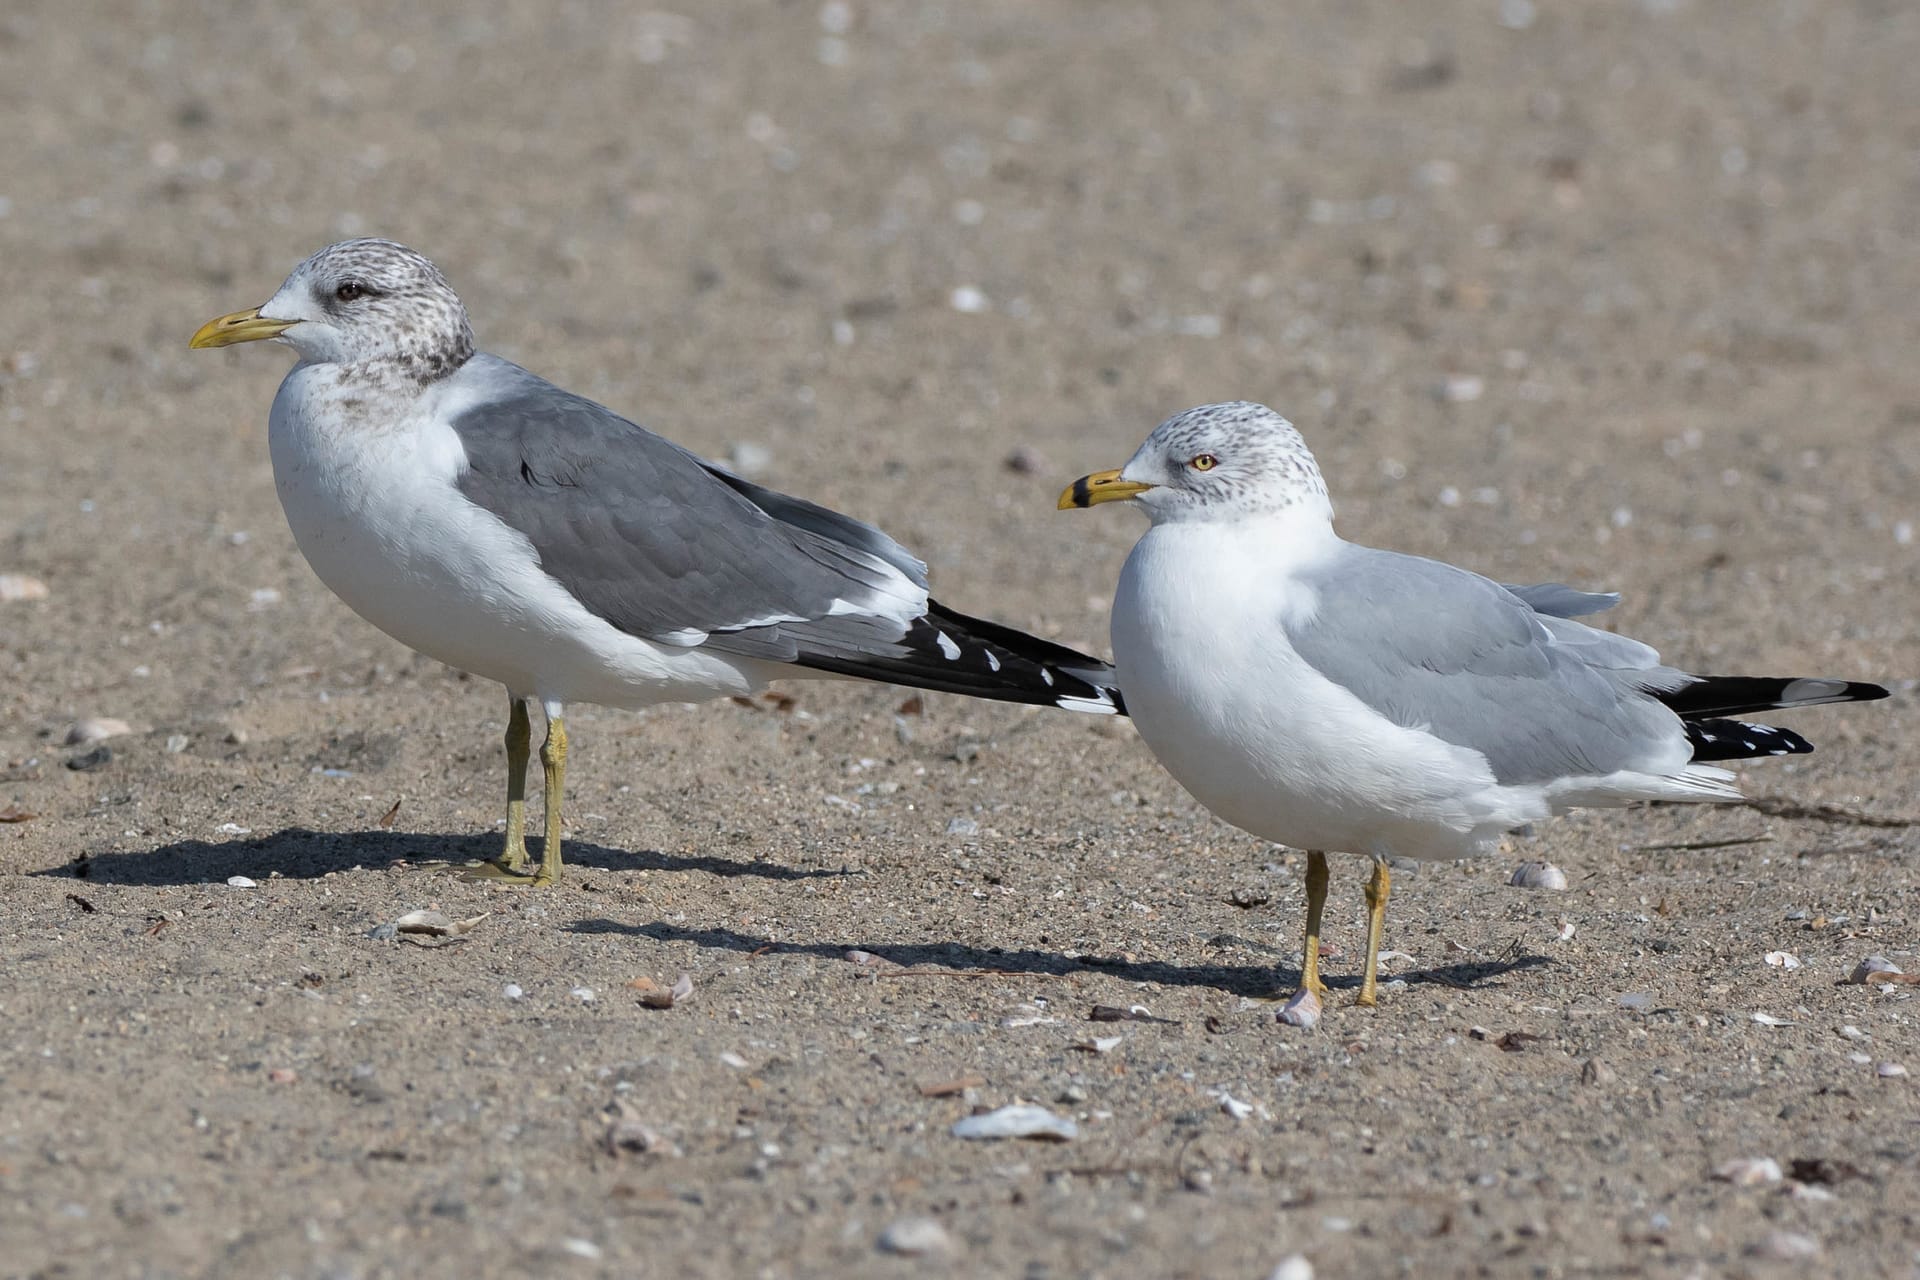 "Kamchatka" Common Gull (left) and Ring-billed Gull, photo by Alex Lamoreaux